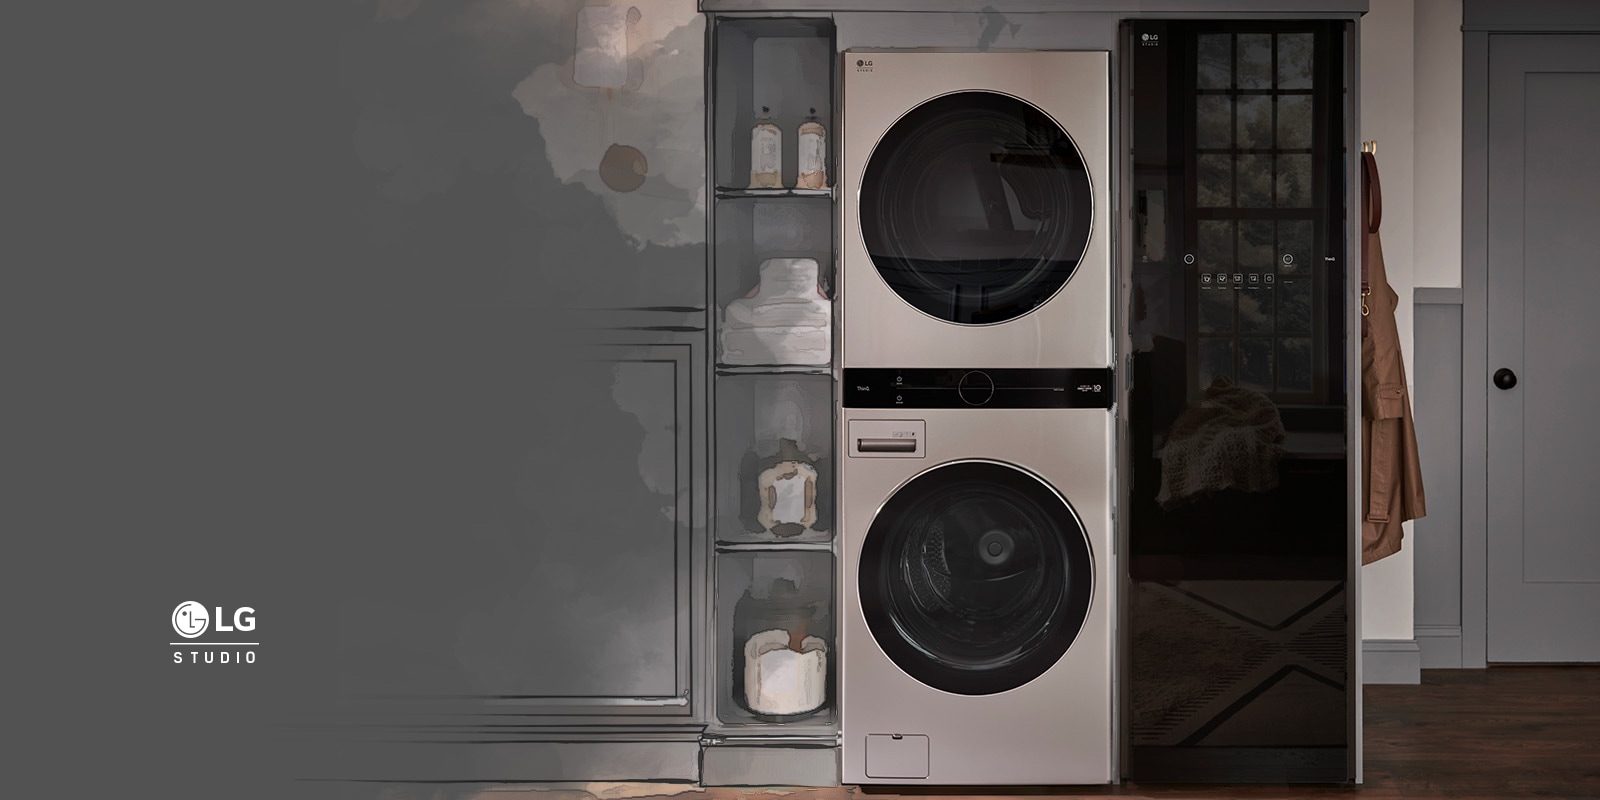 display of LG washer dryer tower and styler